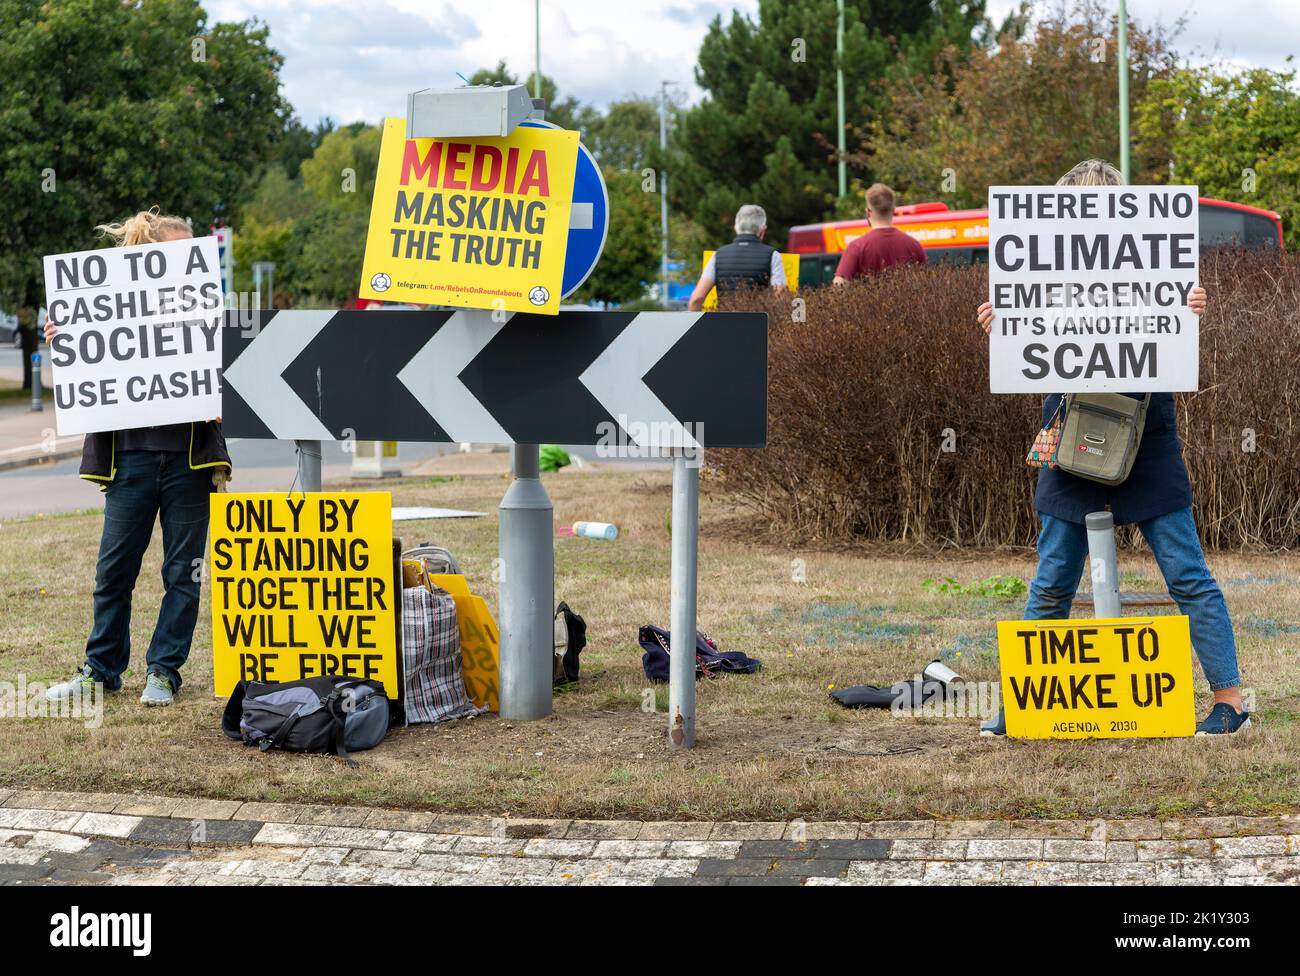 Protest at busy roundabaout, Martlesham, Suffolk, England, UK Climate Emergency is a scam, no to cashless society Stock Photo